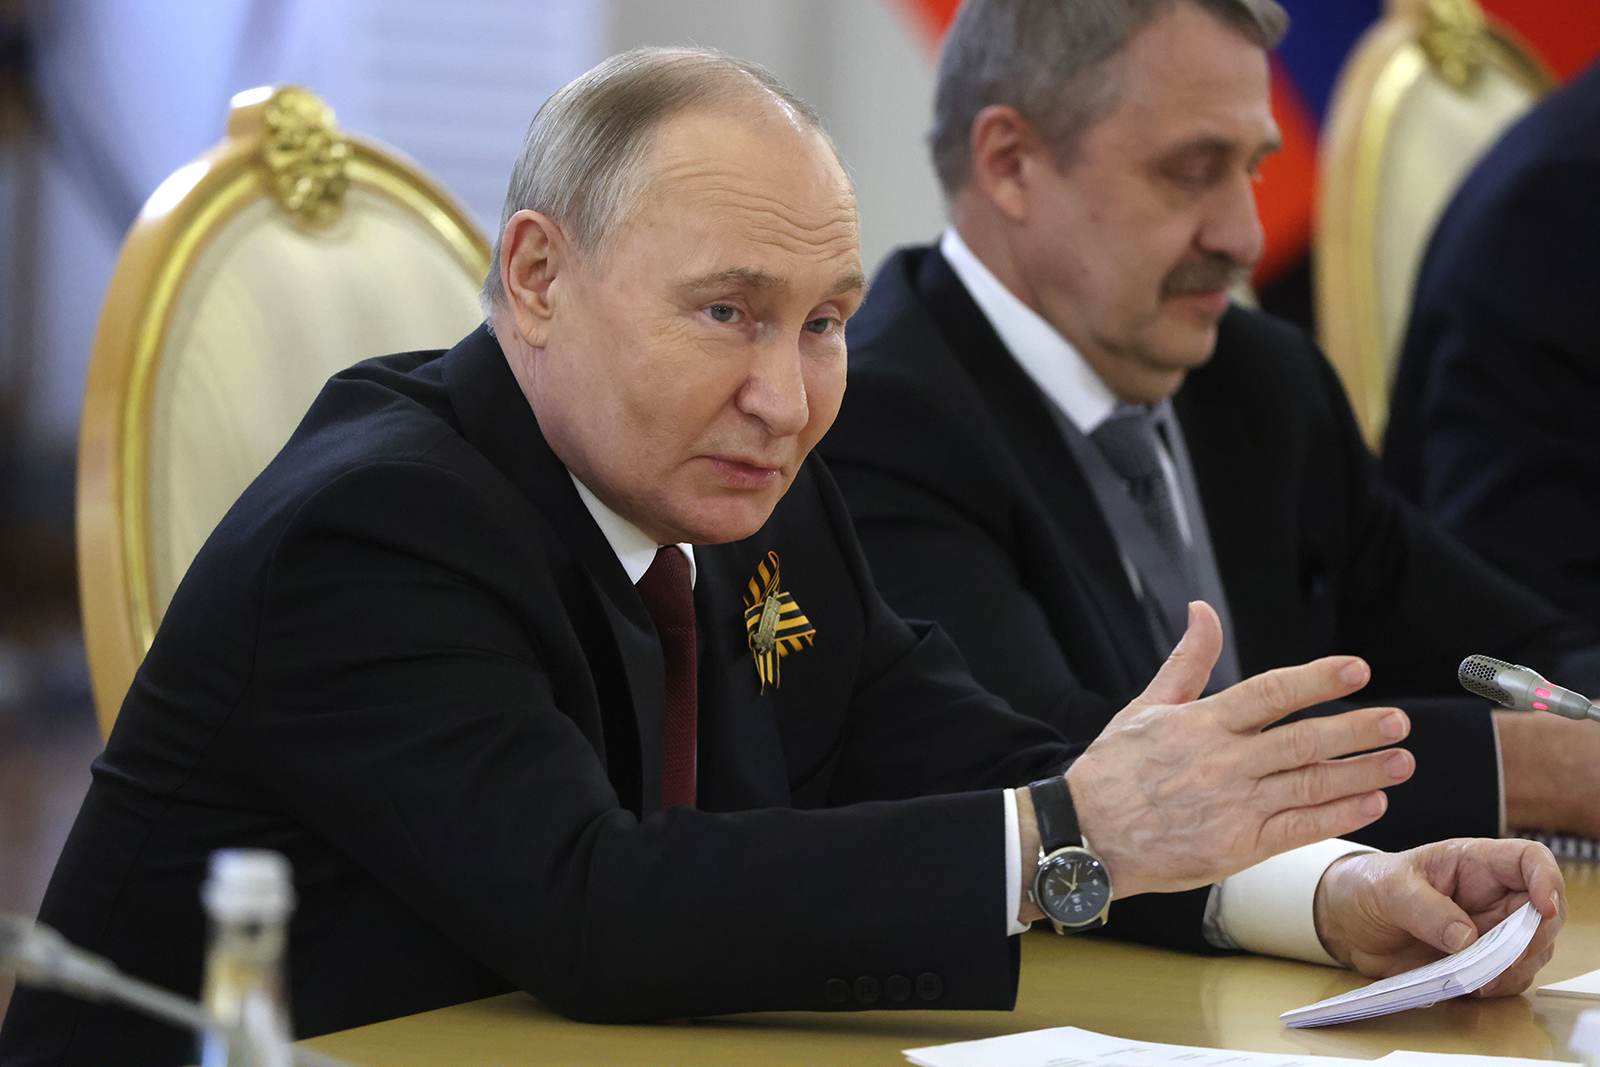 Vladimir Putin attends a meeting at the Grand Kremlin Palace in Moscow, Russia, on May 9.